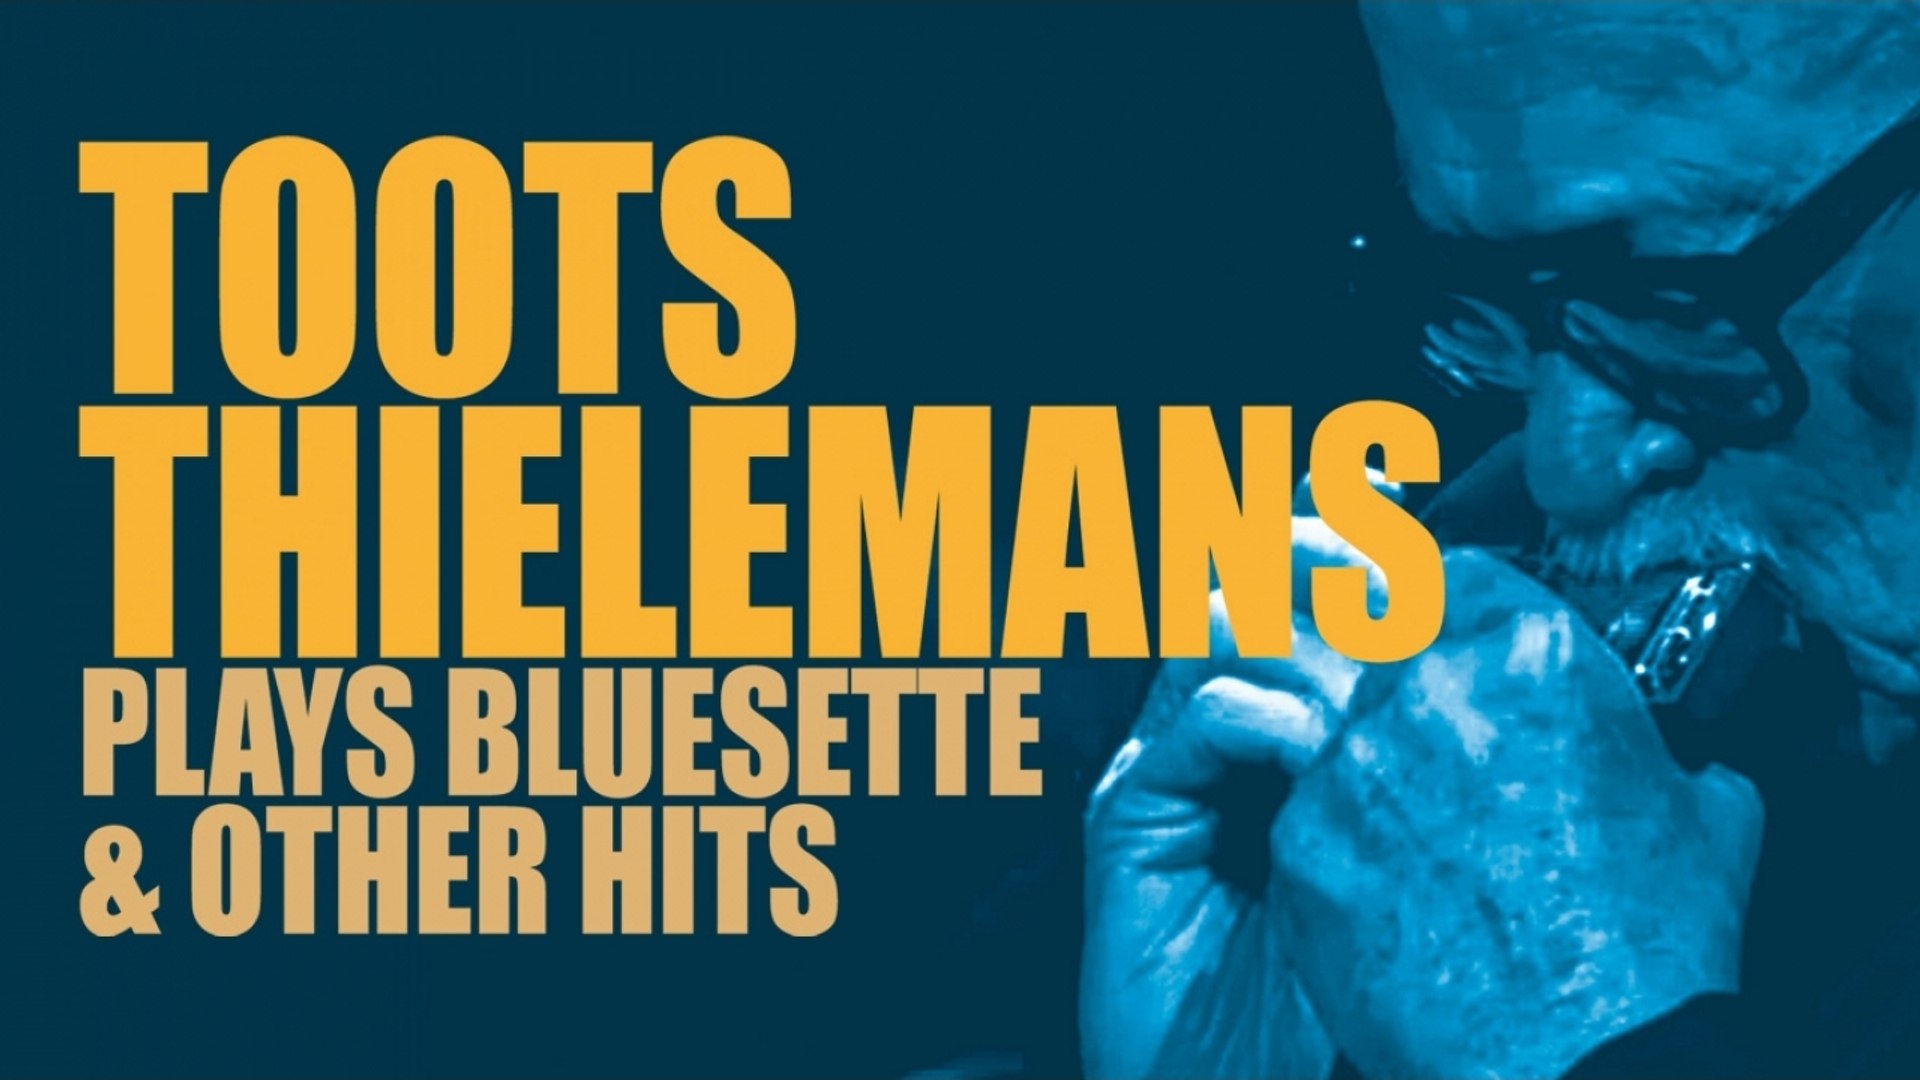 Toots Thielemans - Toots Thielemans Plays Bluesette & Other Hits ...